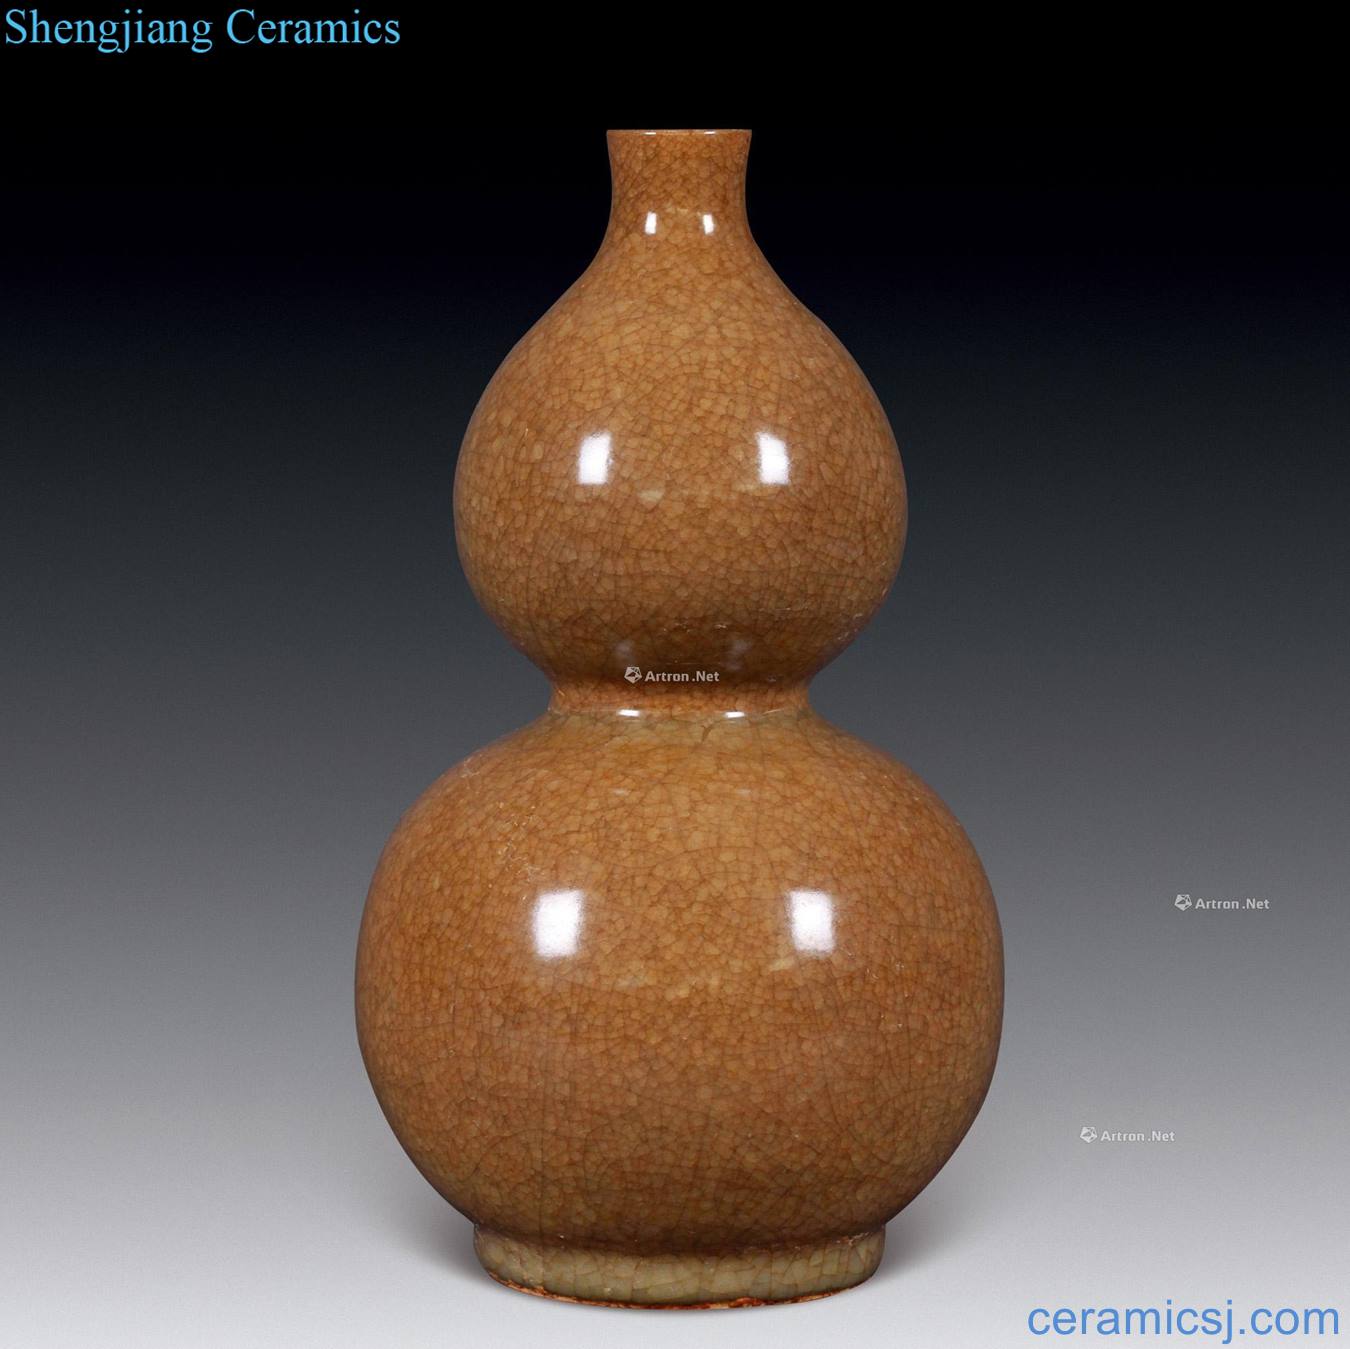 The southern song dynasty Yellow glaze on the gourd bottle